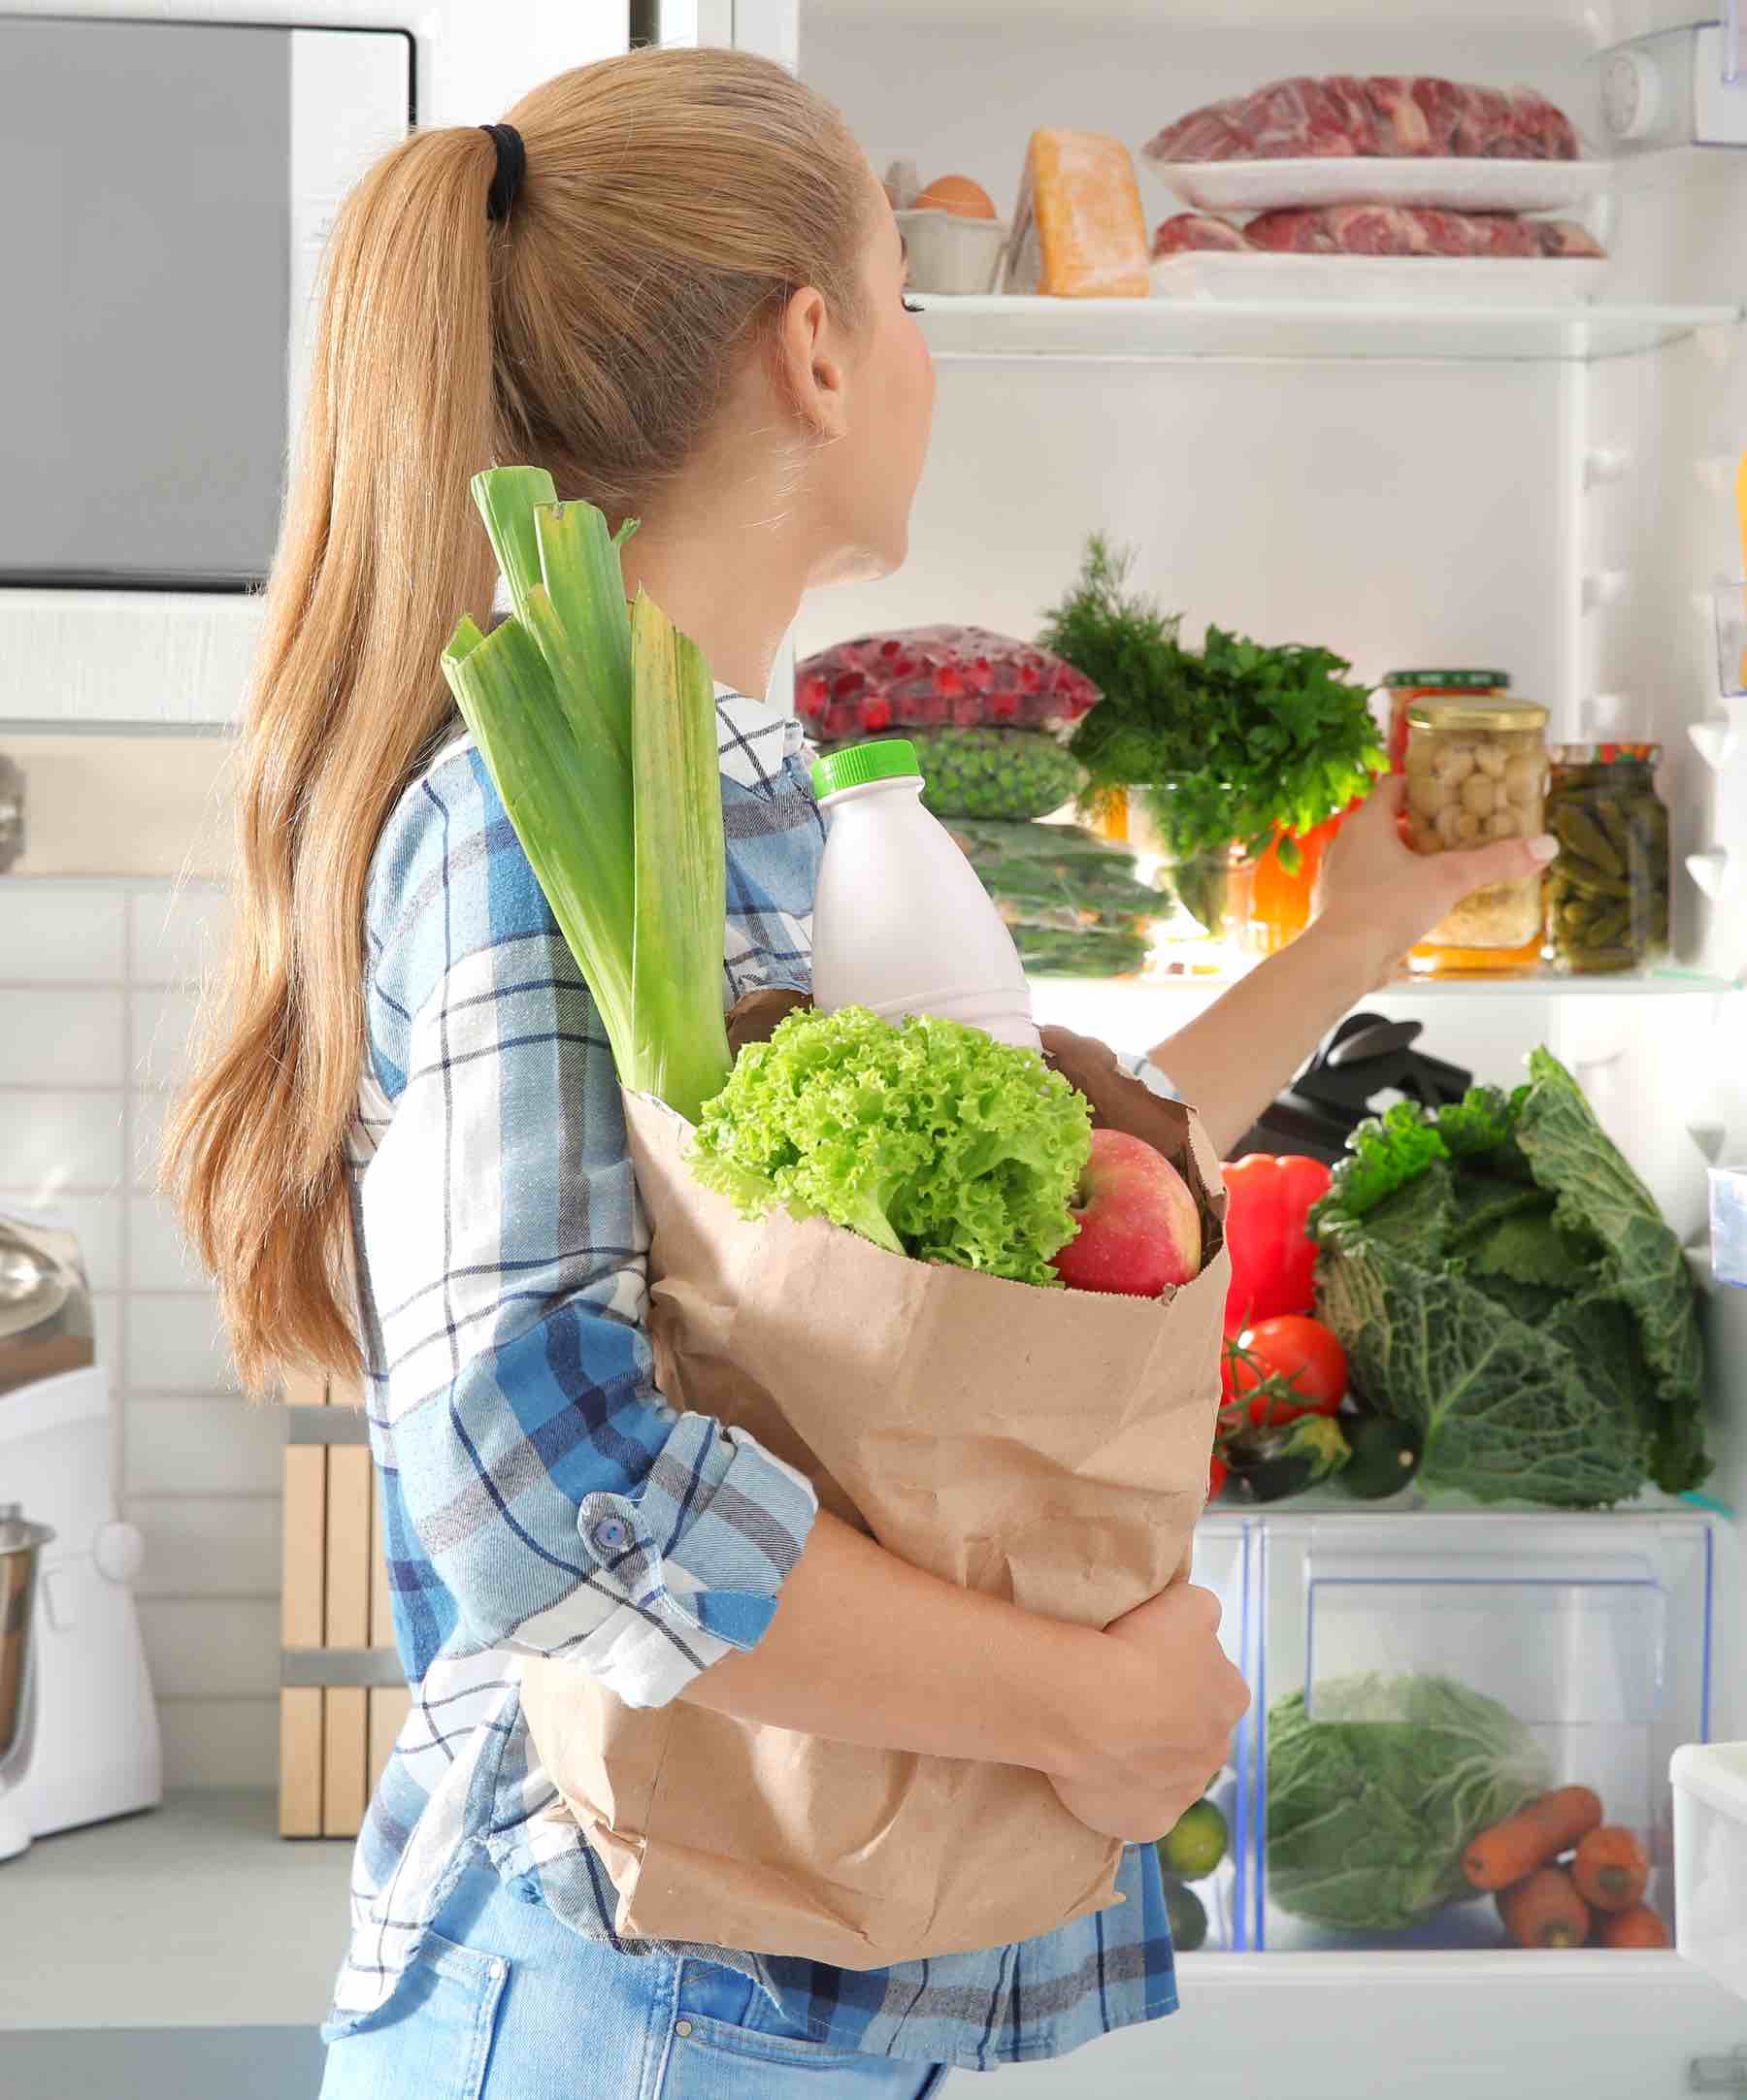 Zerorez suggests cleaning out your refrigerator to keep your family healthy this summer.